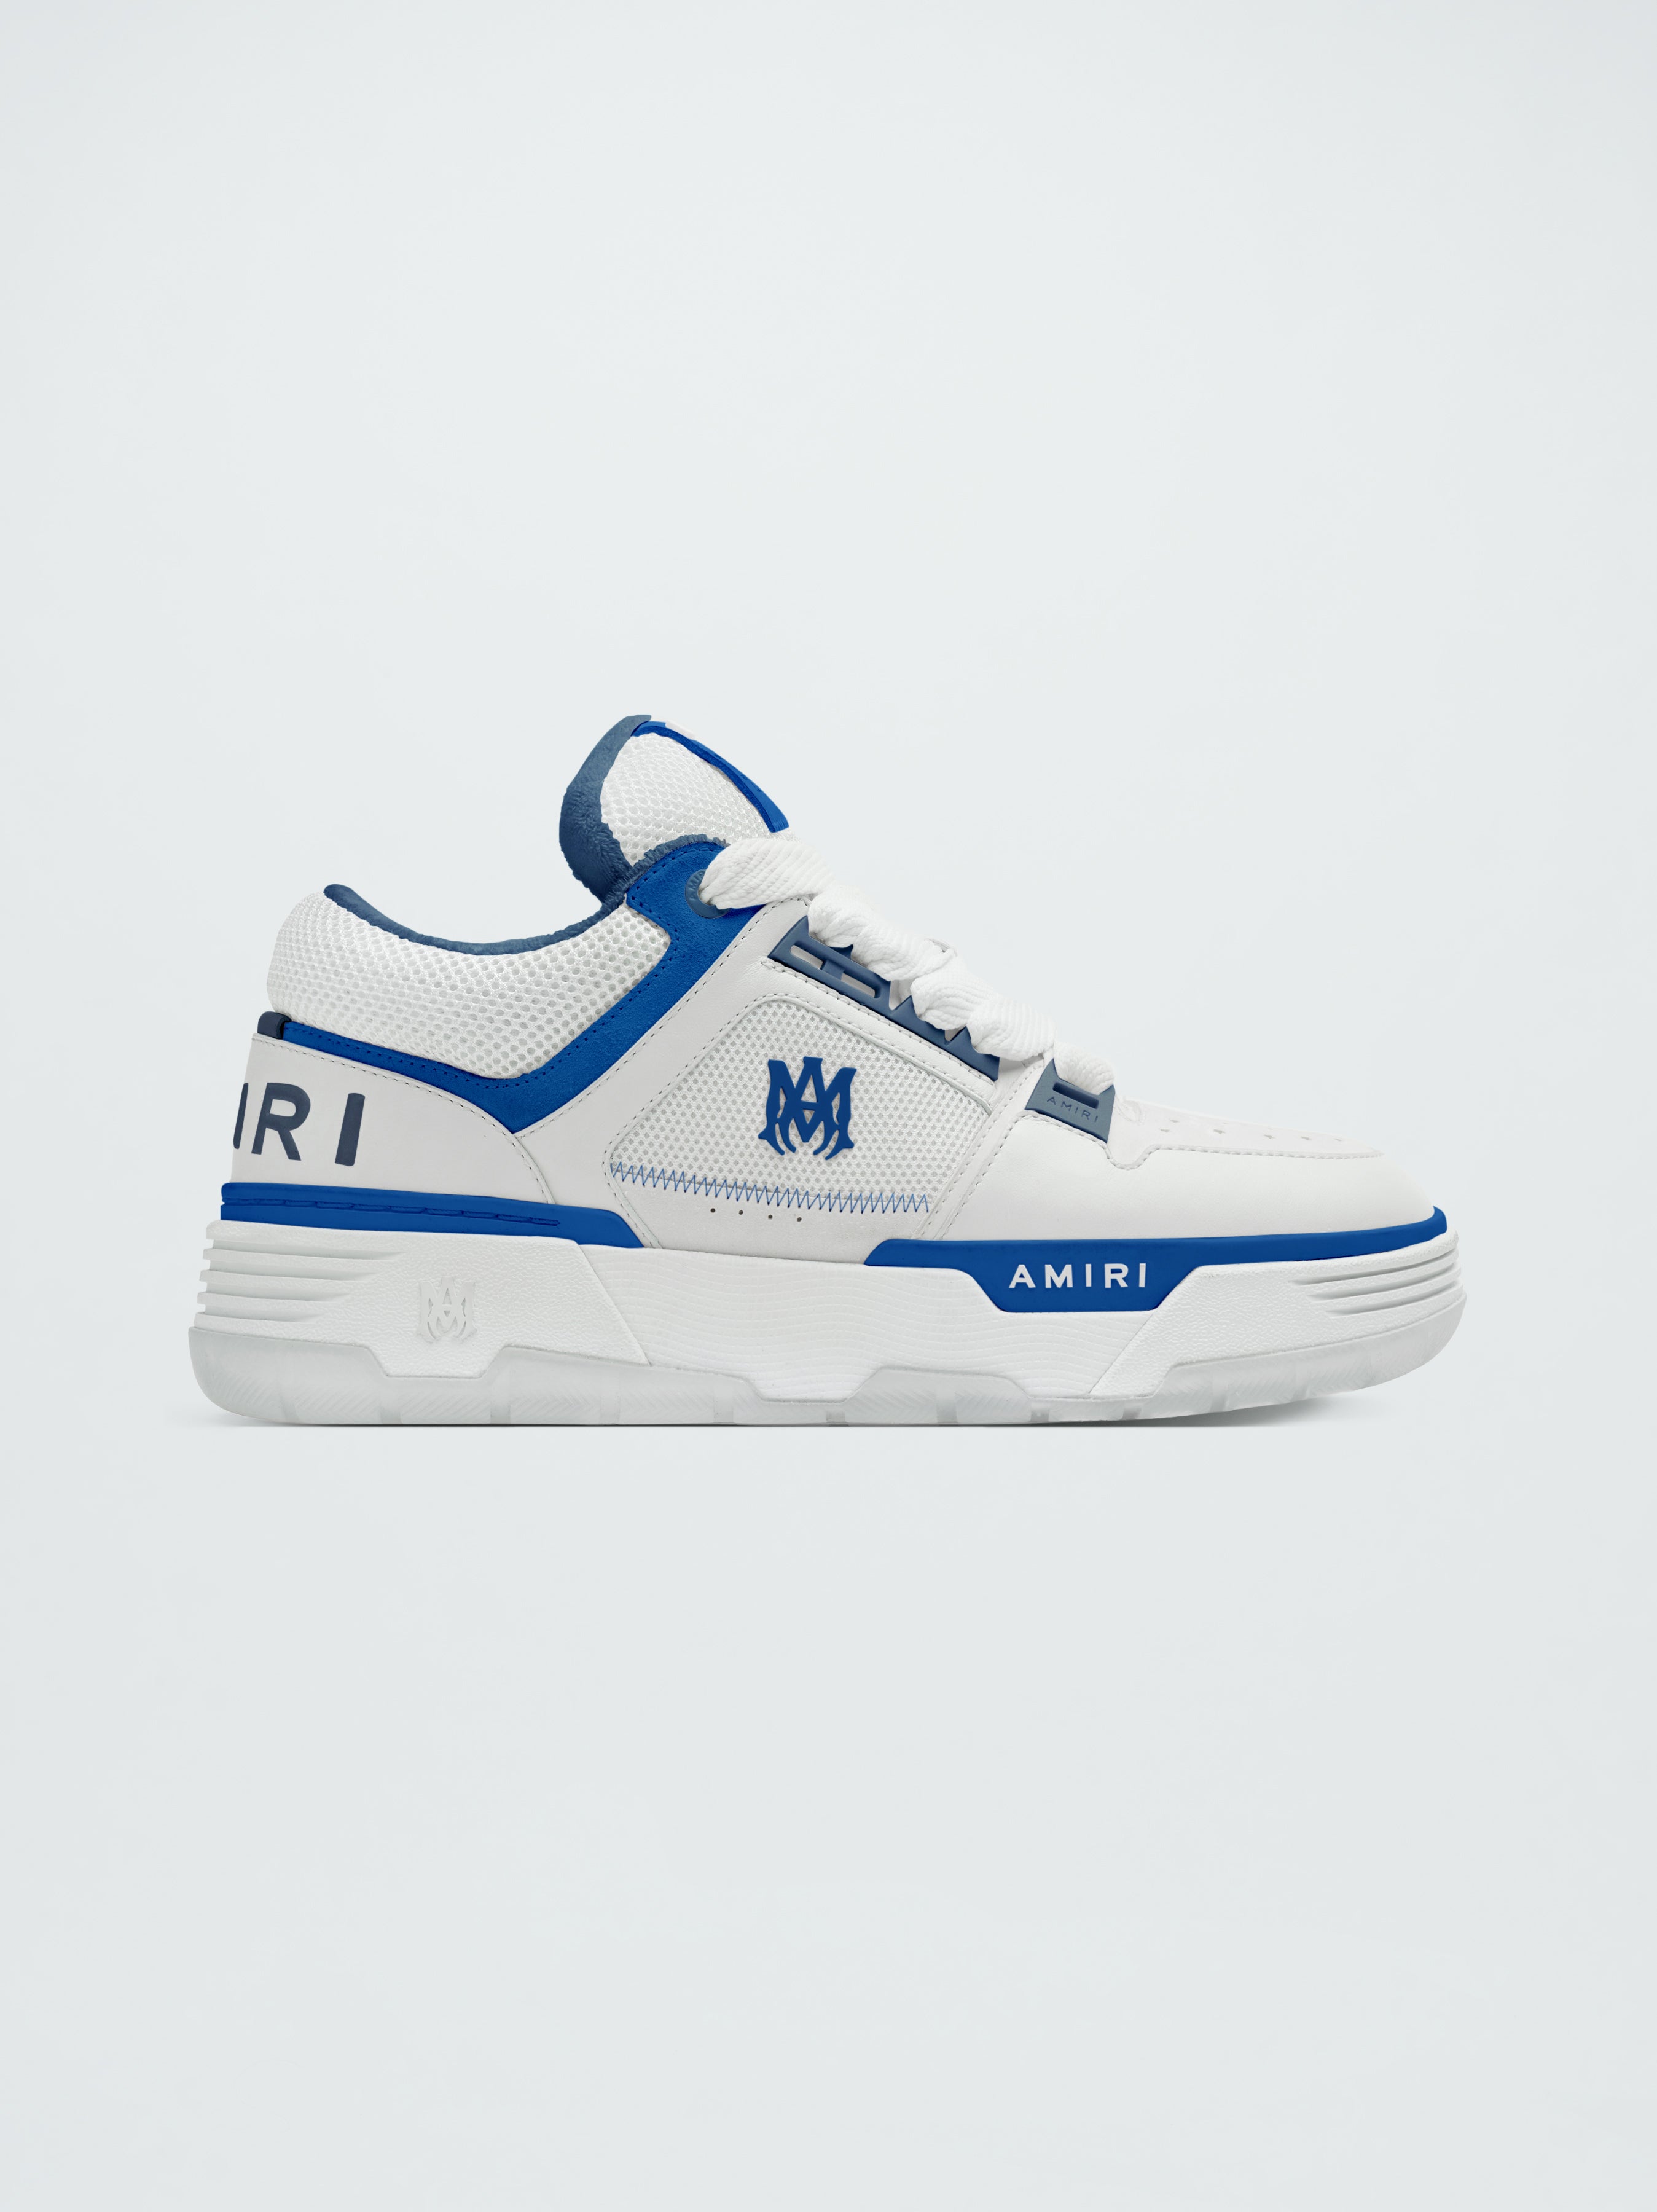 Product MA-1 - NAVY WHITE featured image